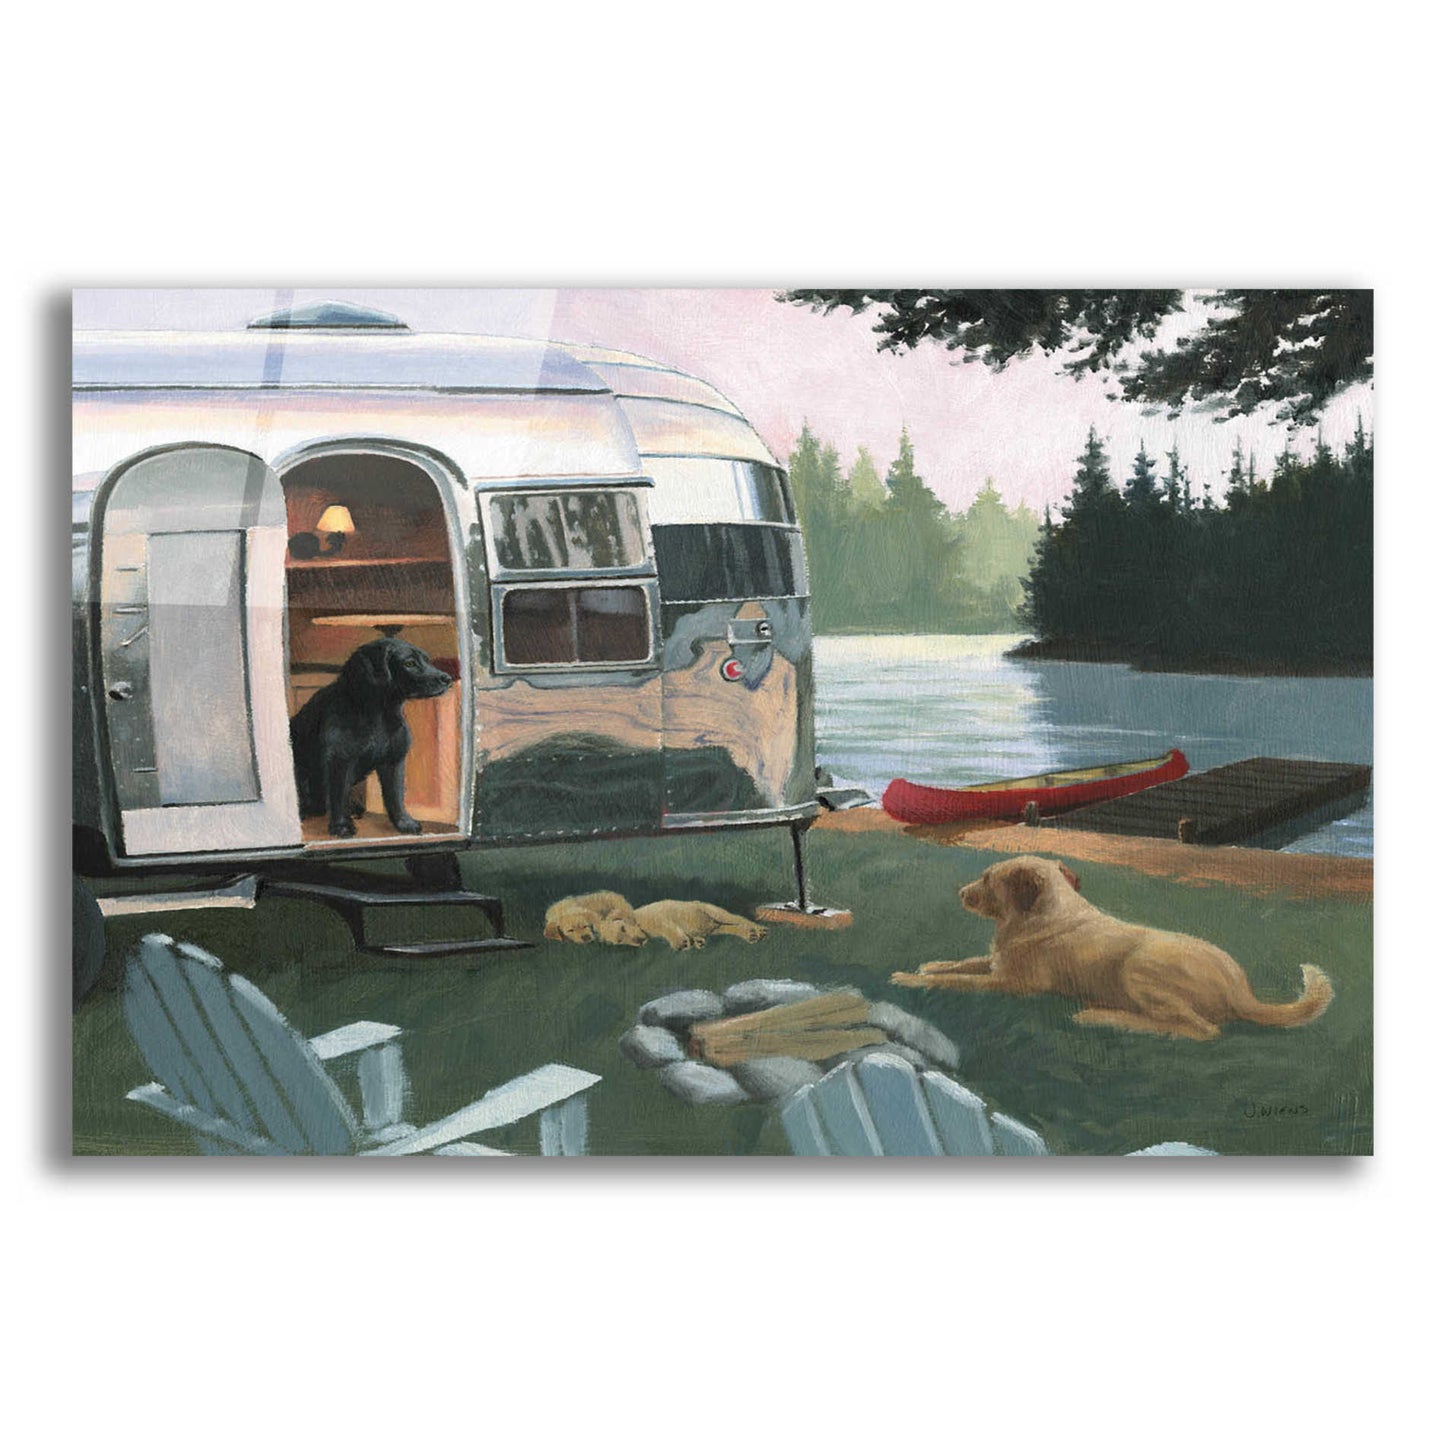 Epic Art 'Canine Camp' by James Wiens, Acrylic Glass Wall Art,16x12x1.1x0,24x20x1.1x0,30x26x1.74x0,54x40x1.74x0